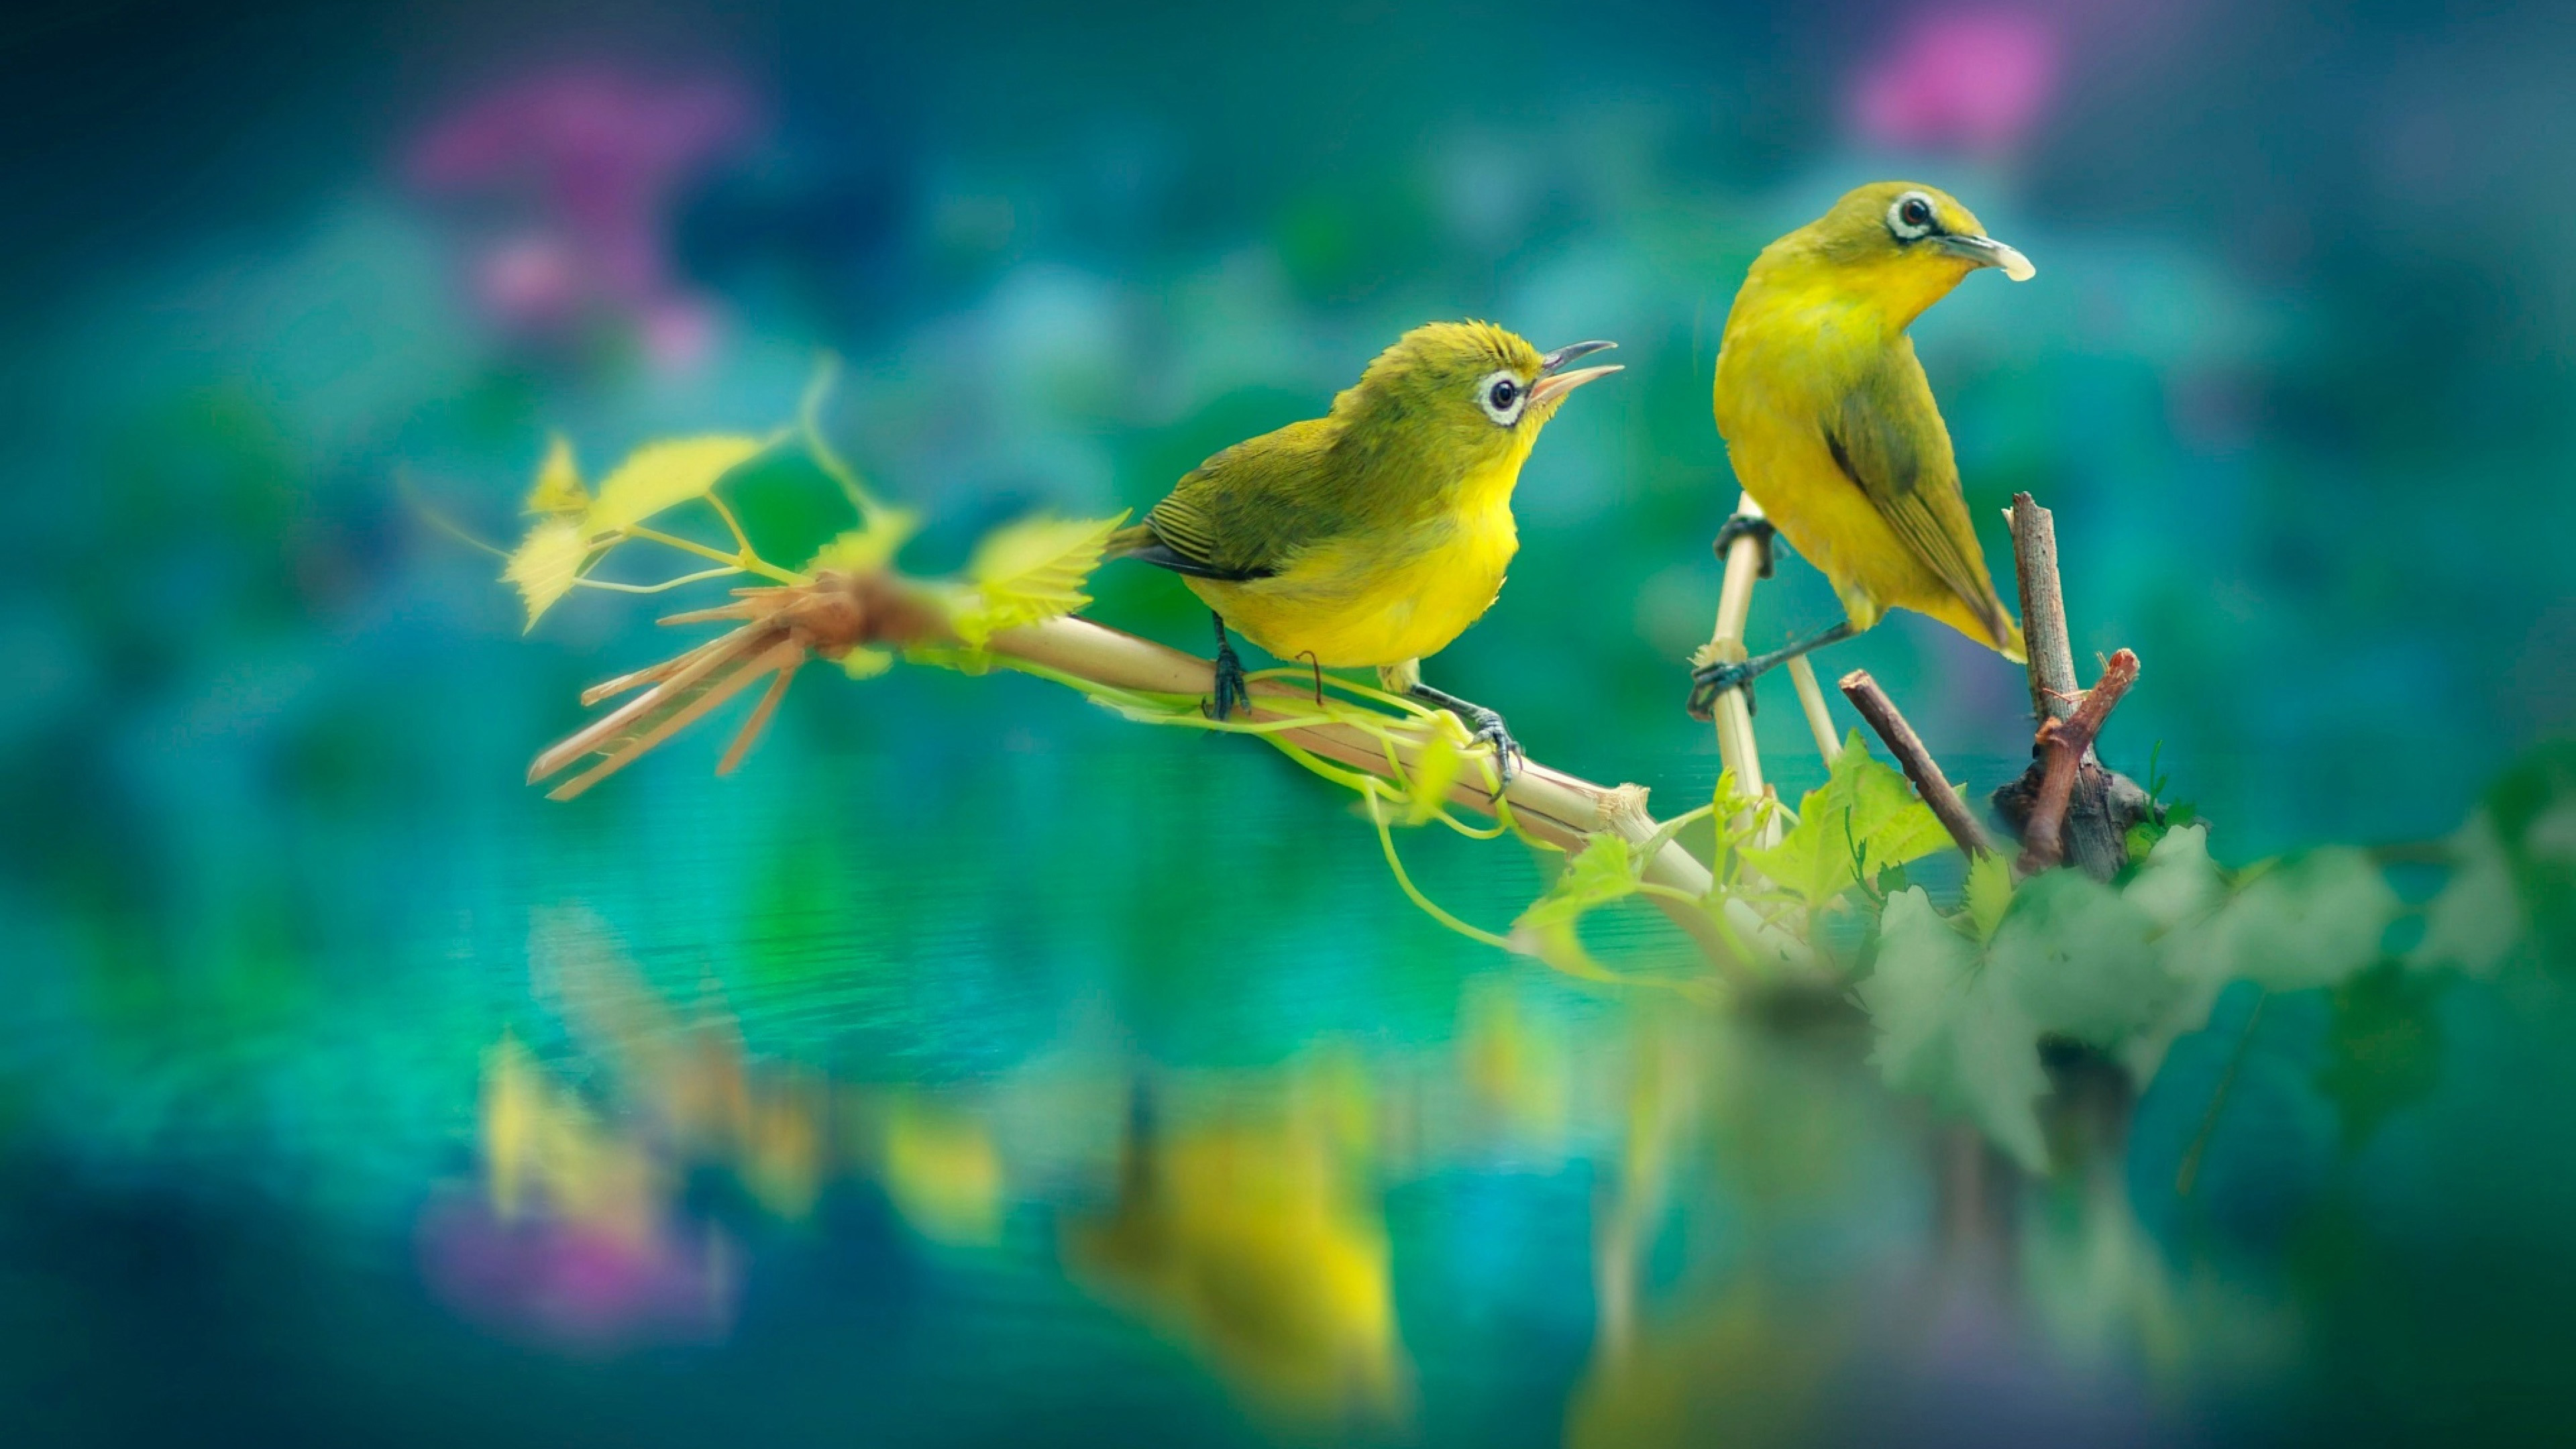 Cute Yellow Birds Are Sitting On Stick In Body Of Water With Reflection K 2K Animals